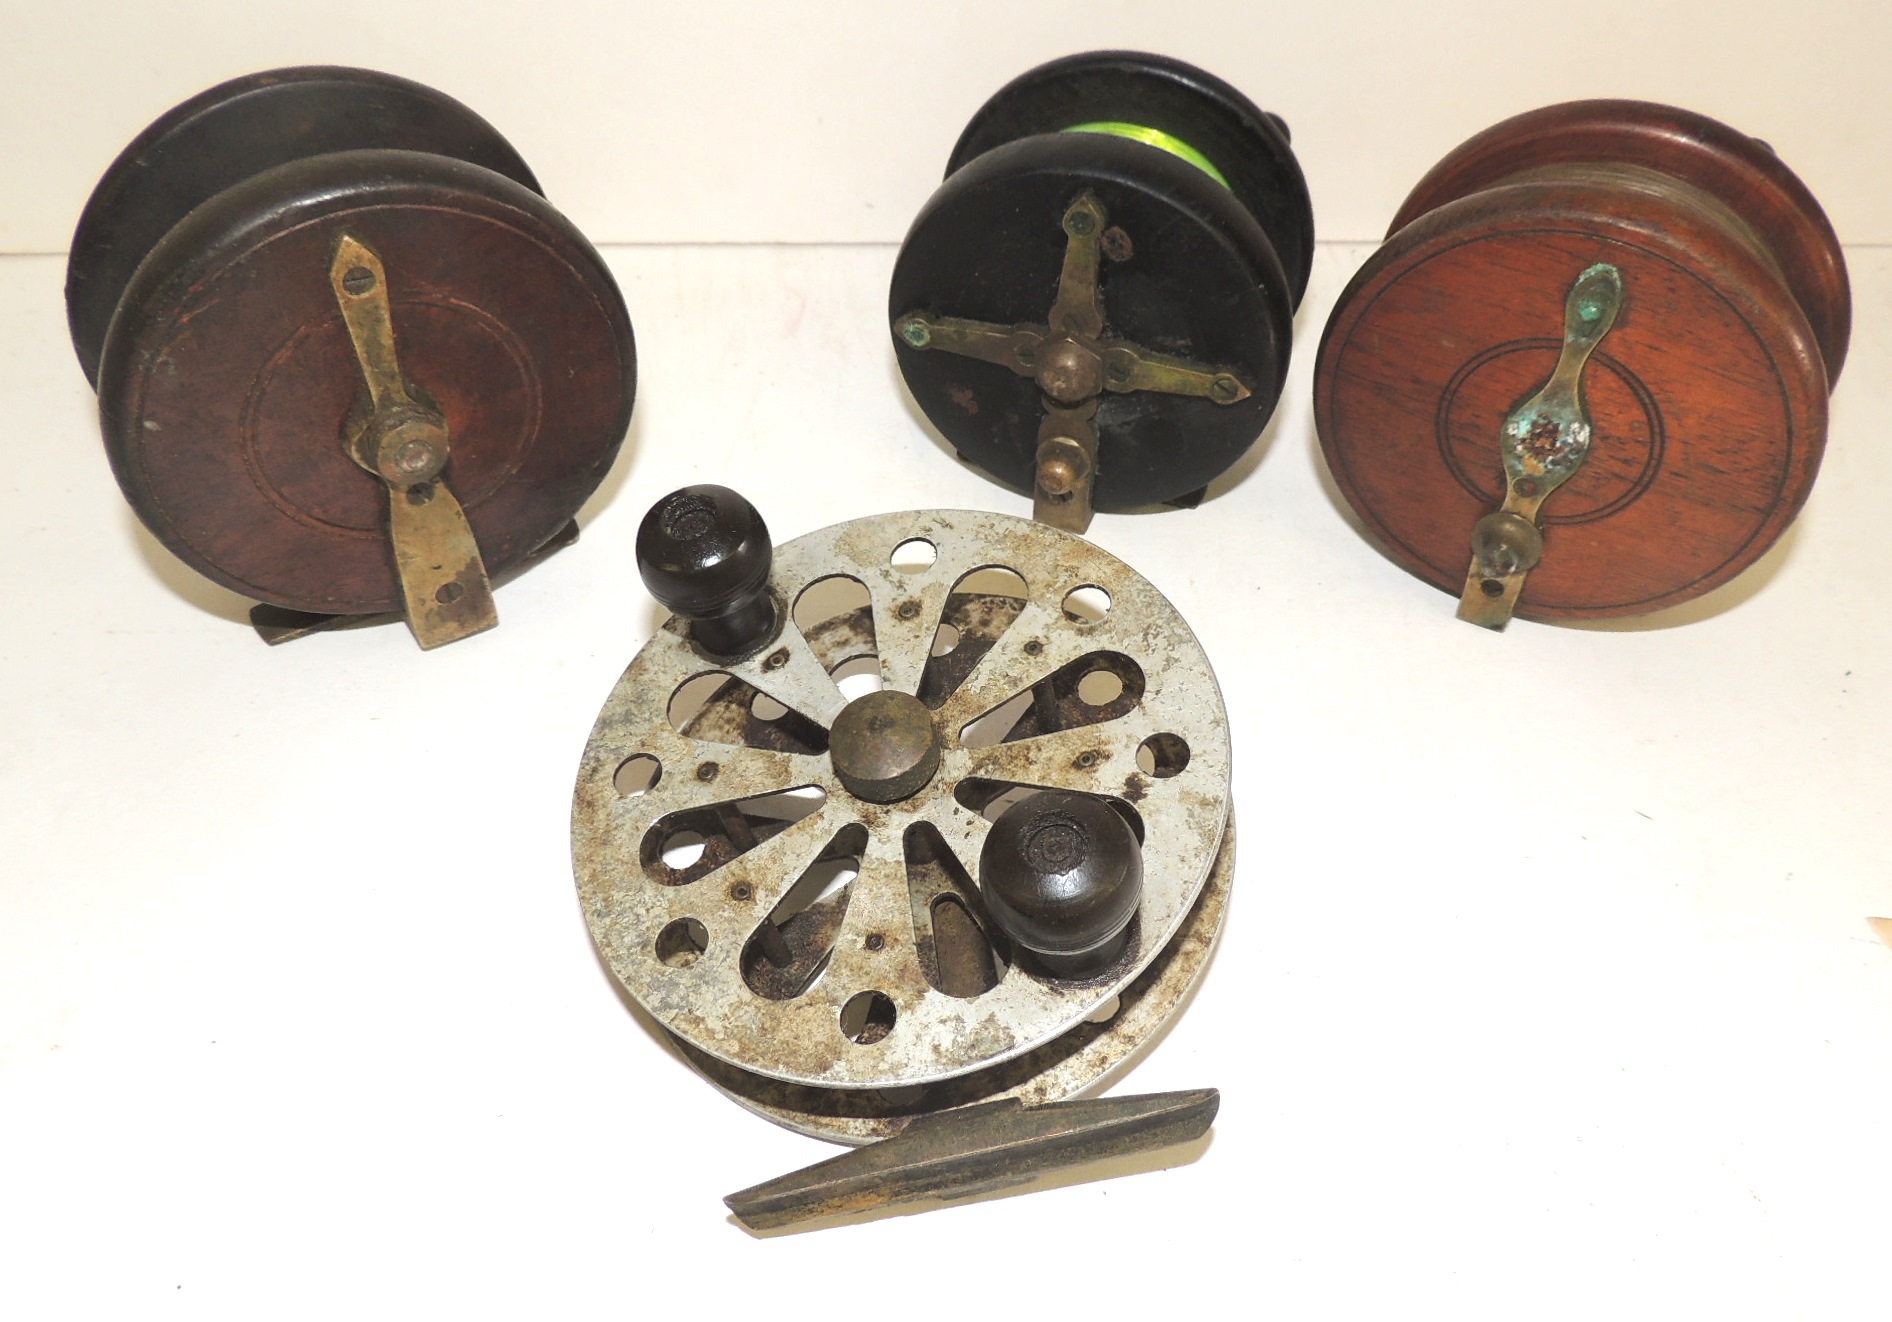 FISHING - a dark wood Nottingham style reel 3.75" with brass star back; two wood and brass reels and